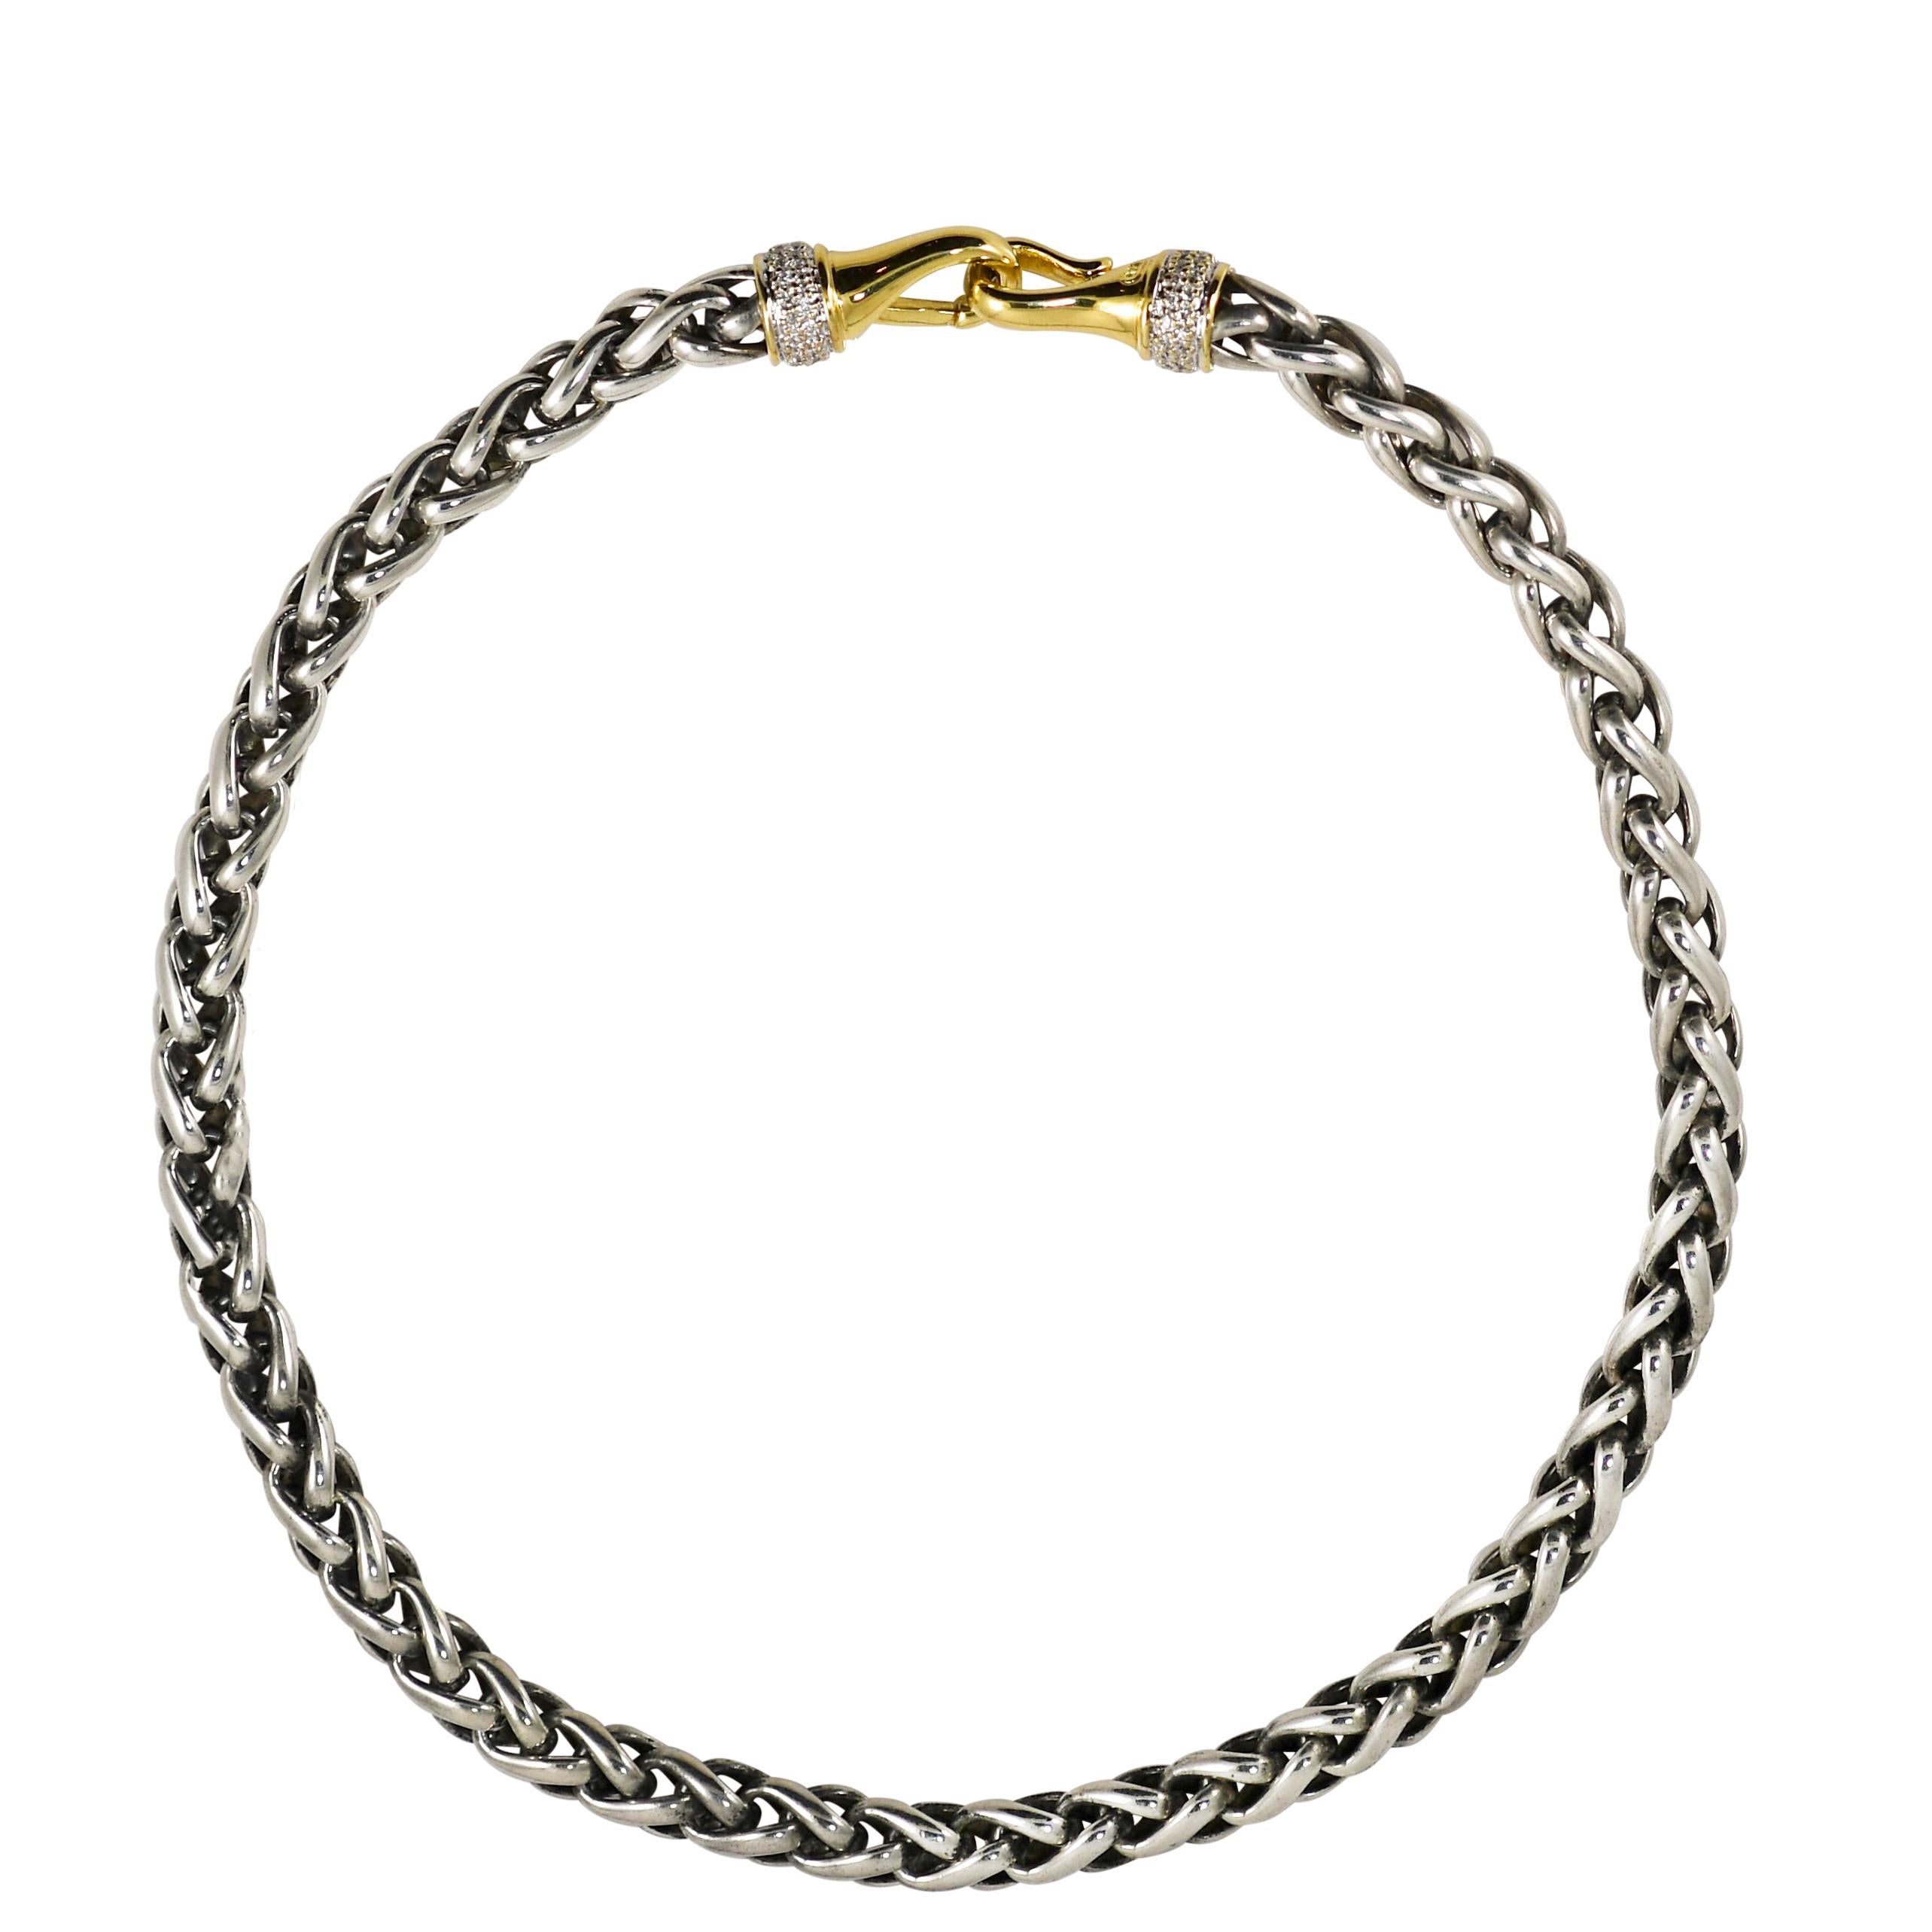 18k Yellow Gold, Sterling Silver, & Diamond David Yurman Necklace, .50tdw

David Yurman sterling silver, 18k yellow gold and diamond necklace.
Stamped D.Y., .925,.750 and weighs 97 grams.
The large clasps are 18k gold with diamonds around the